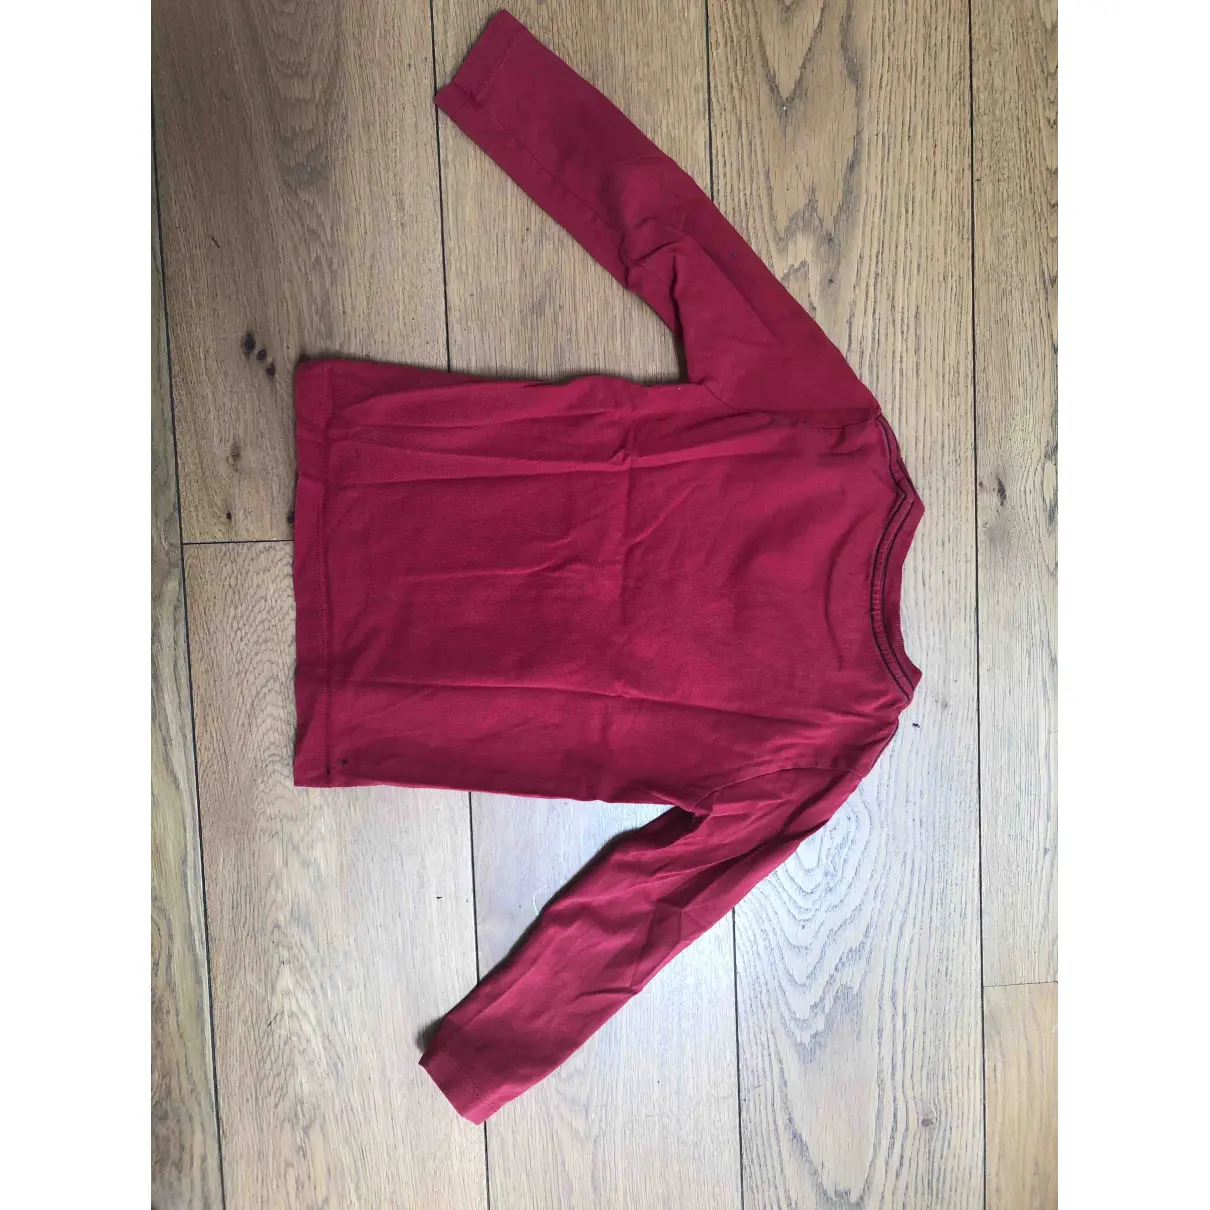 Buy Paul Smith Red Cotton Top online